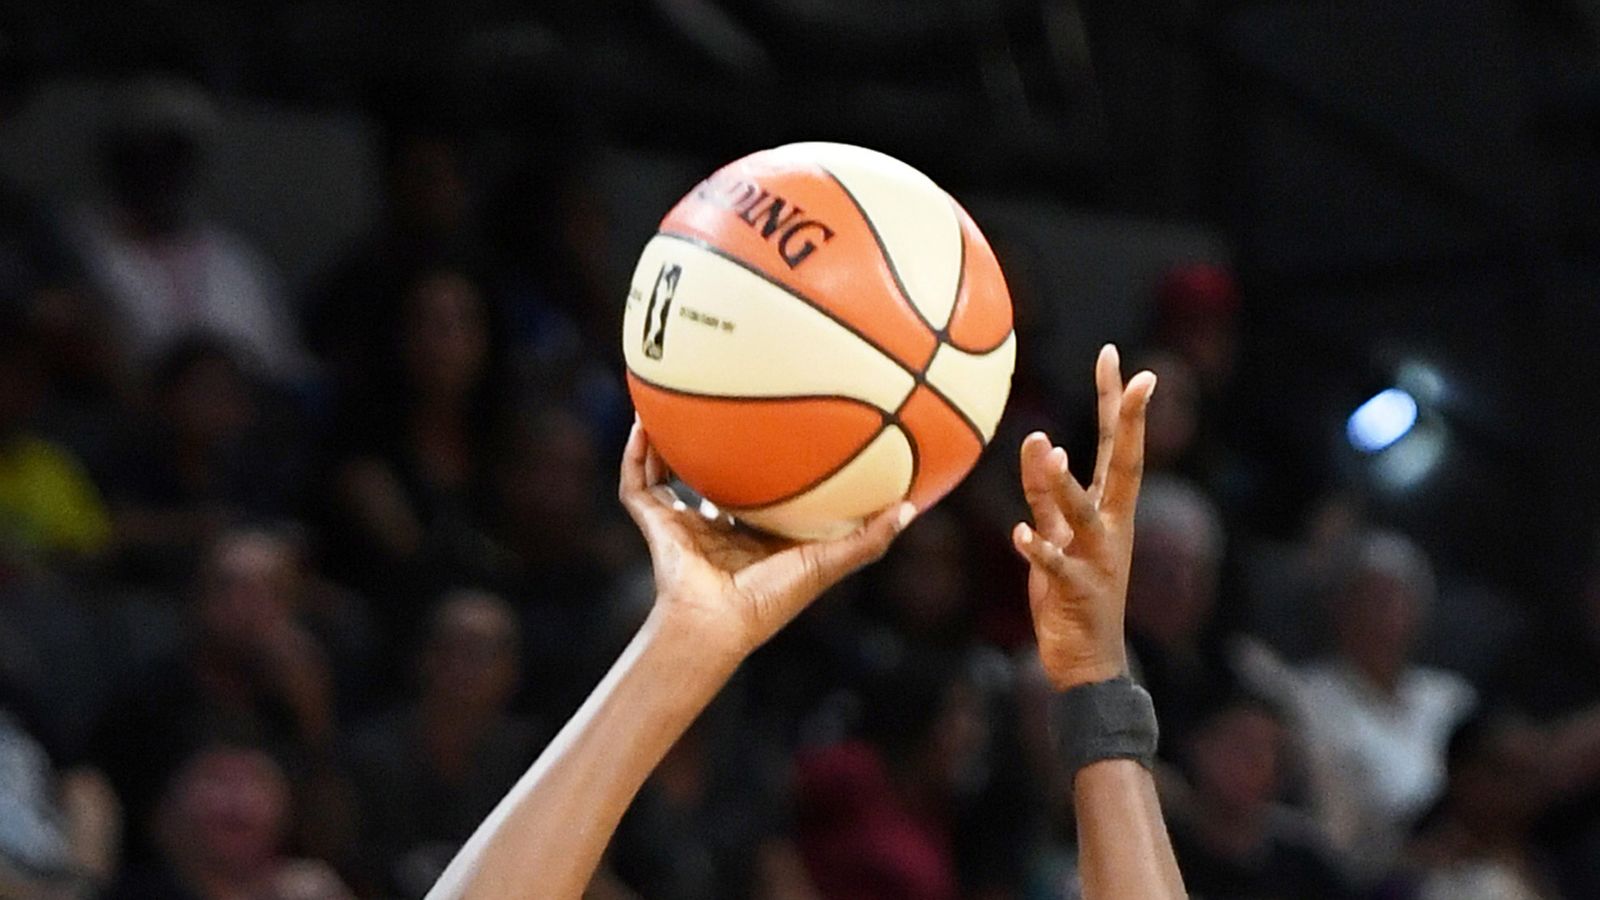 Sky owner battling odds trying to develop successful WNBA model